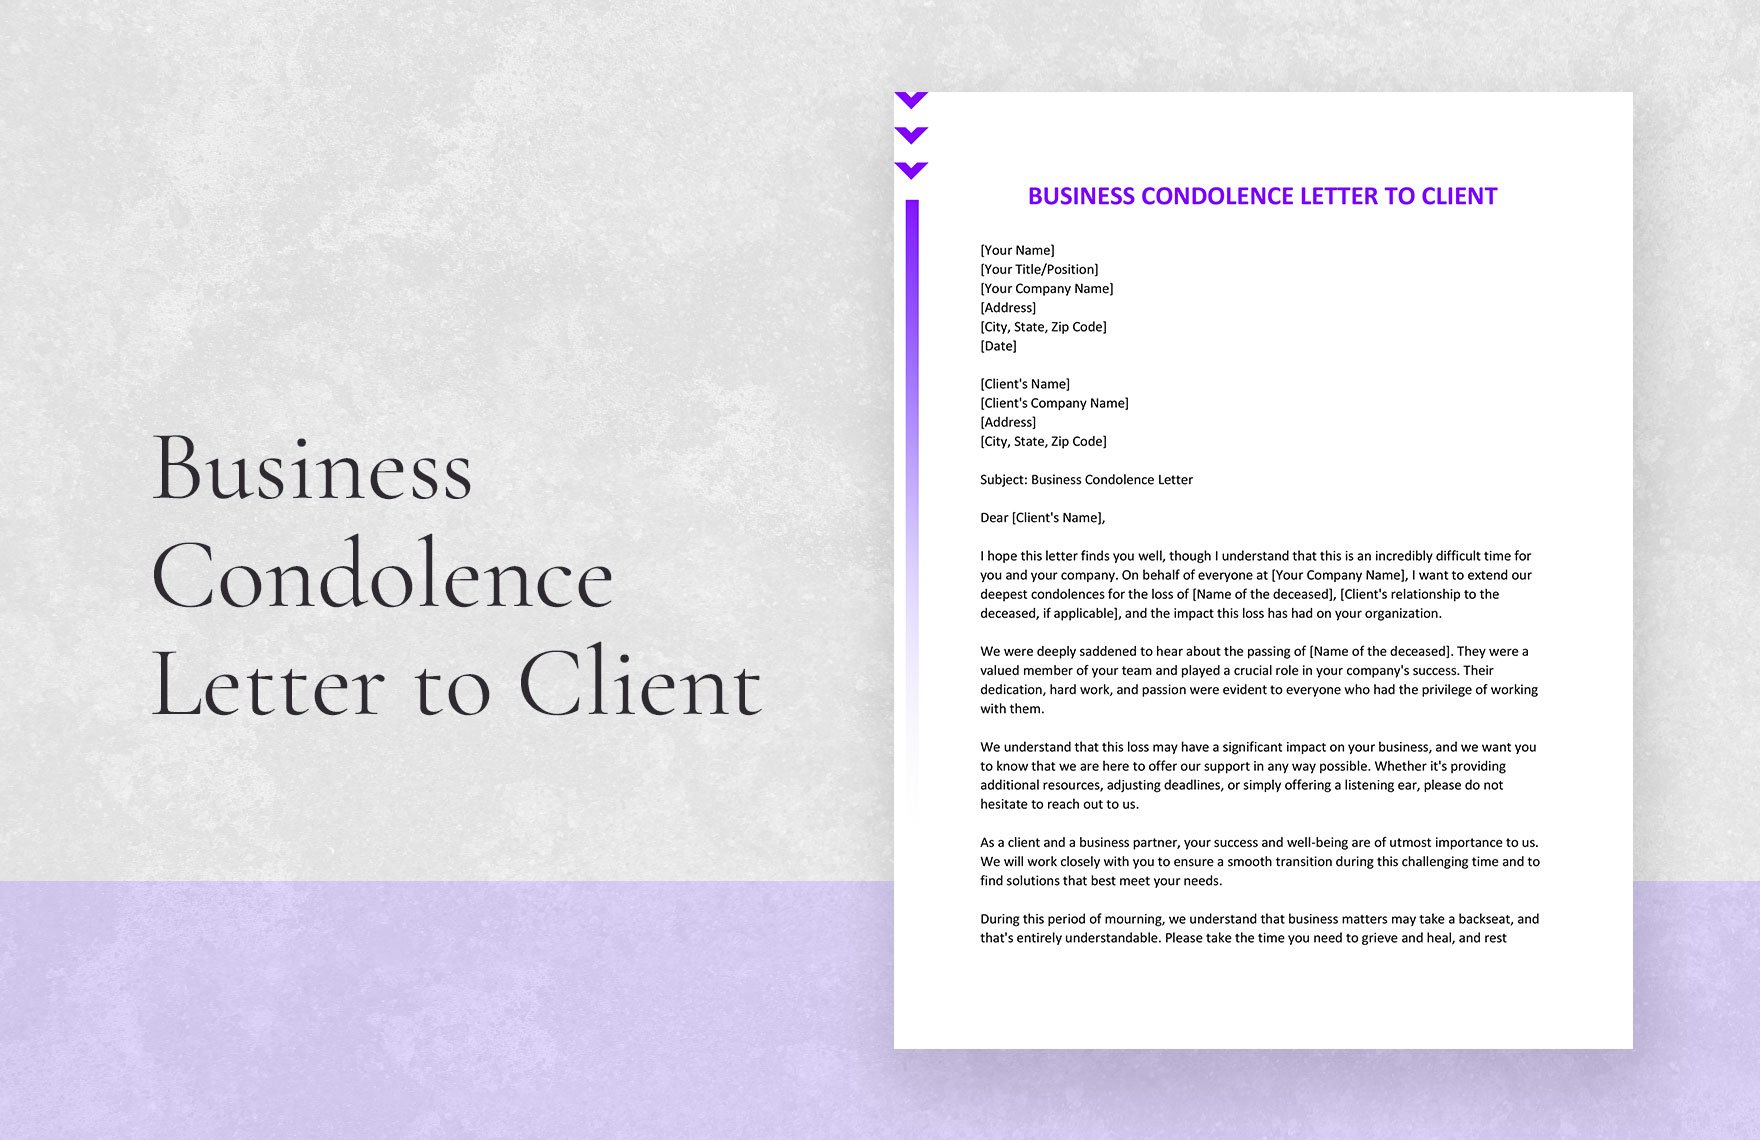 Free Business Condolence Letter to Client in Word, Google Docs, Apple Pages